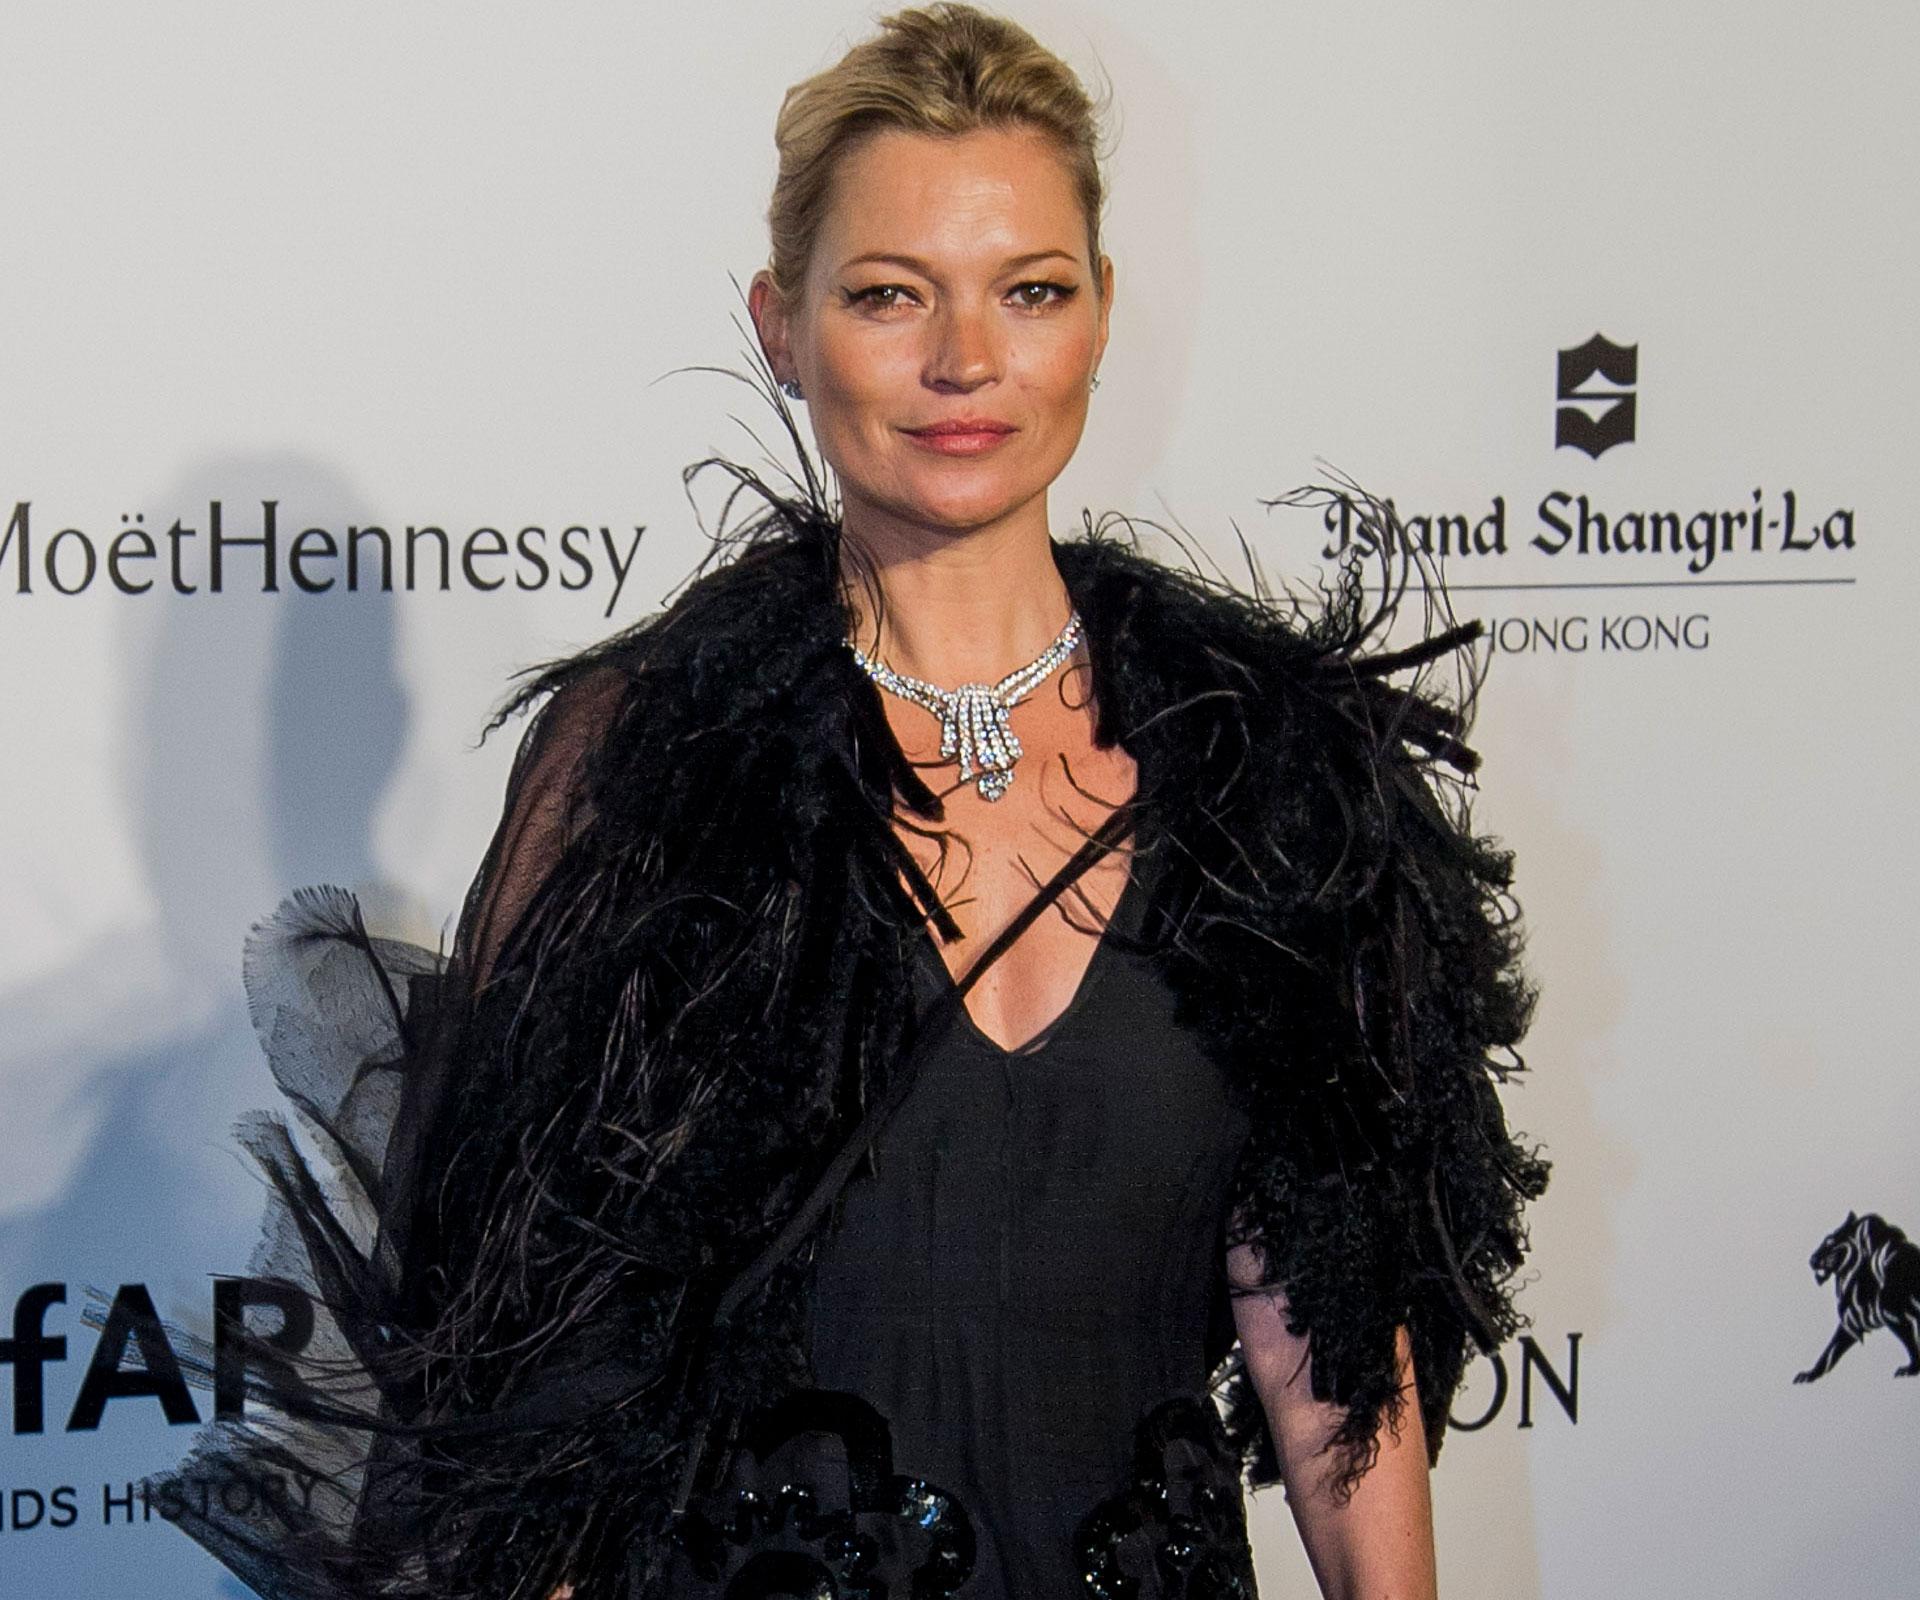 Kate Moss opens up about her rise to fame